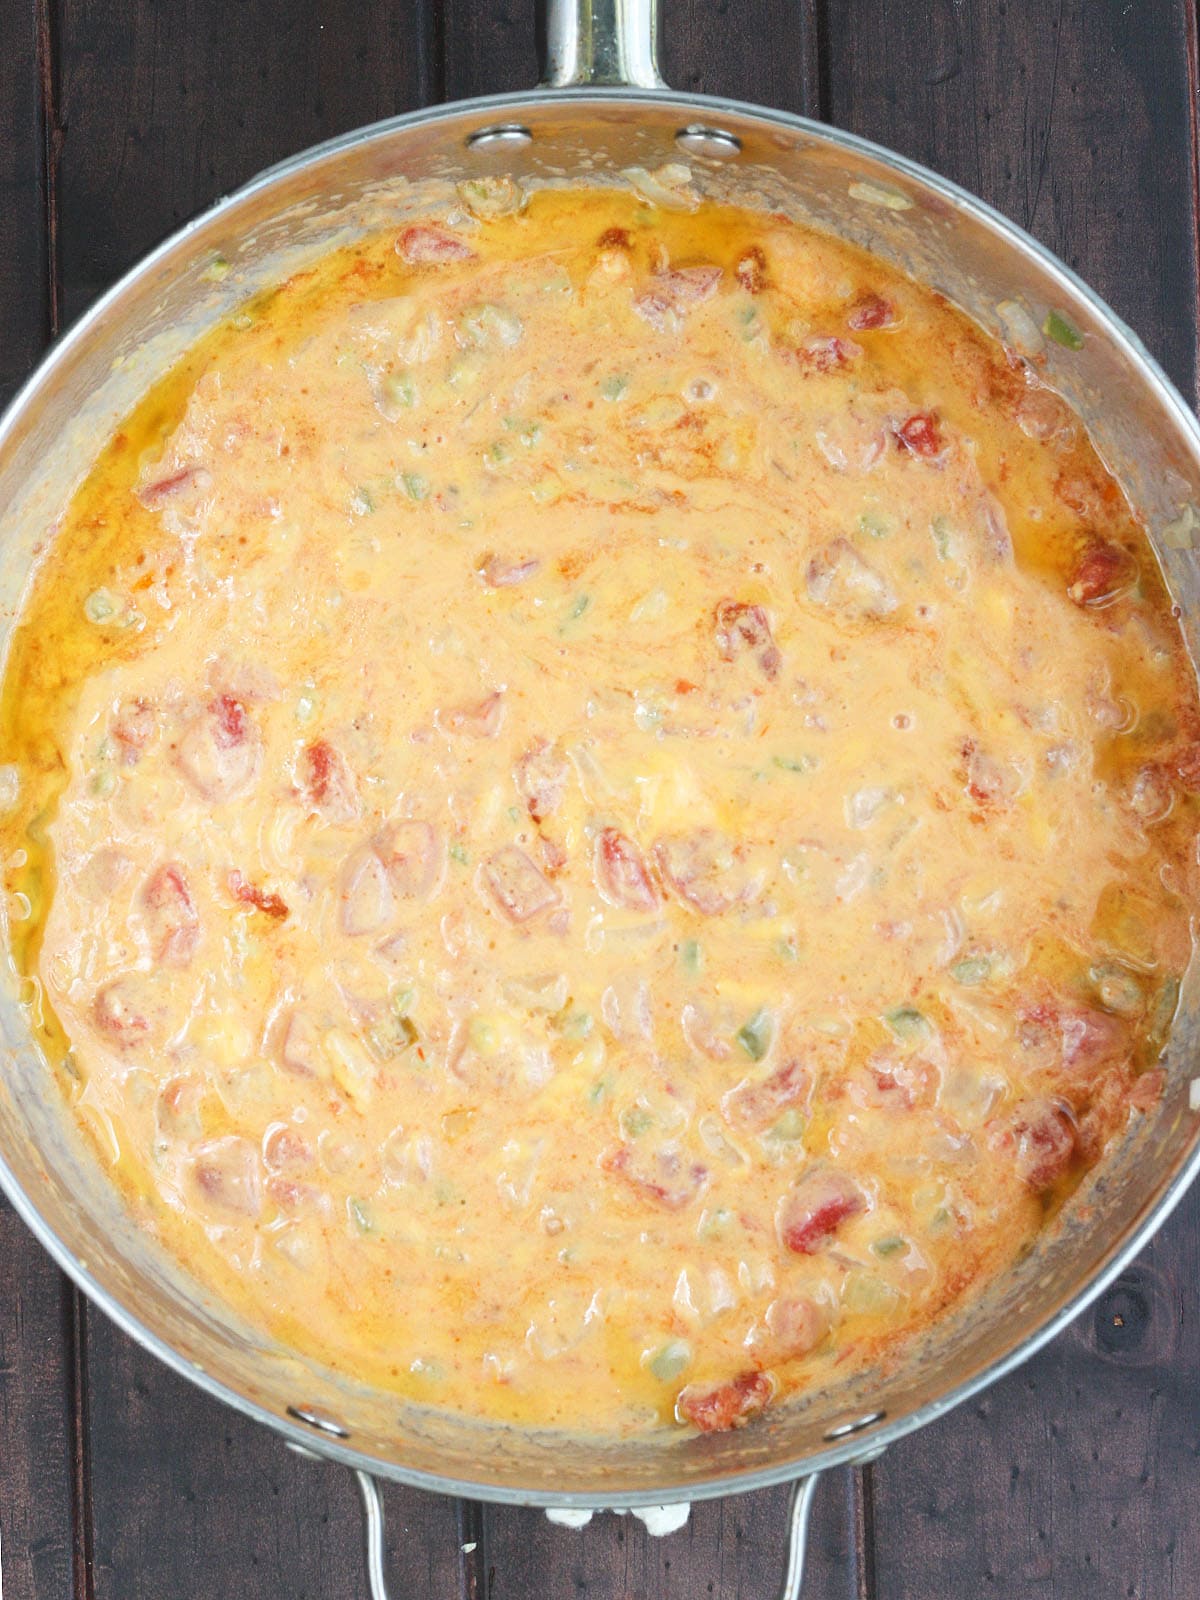 melted cheese, rotel tomatoes and vegetables in a large stainless steel skillet